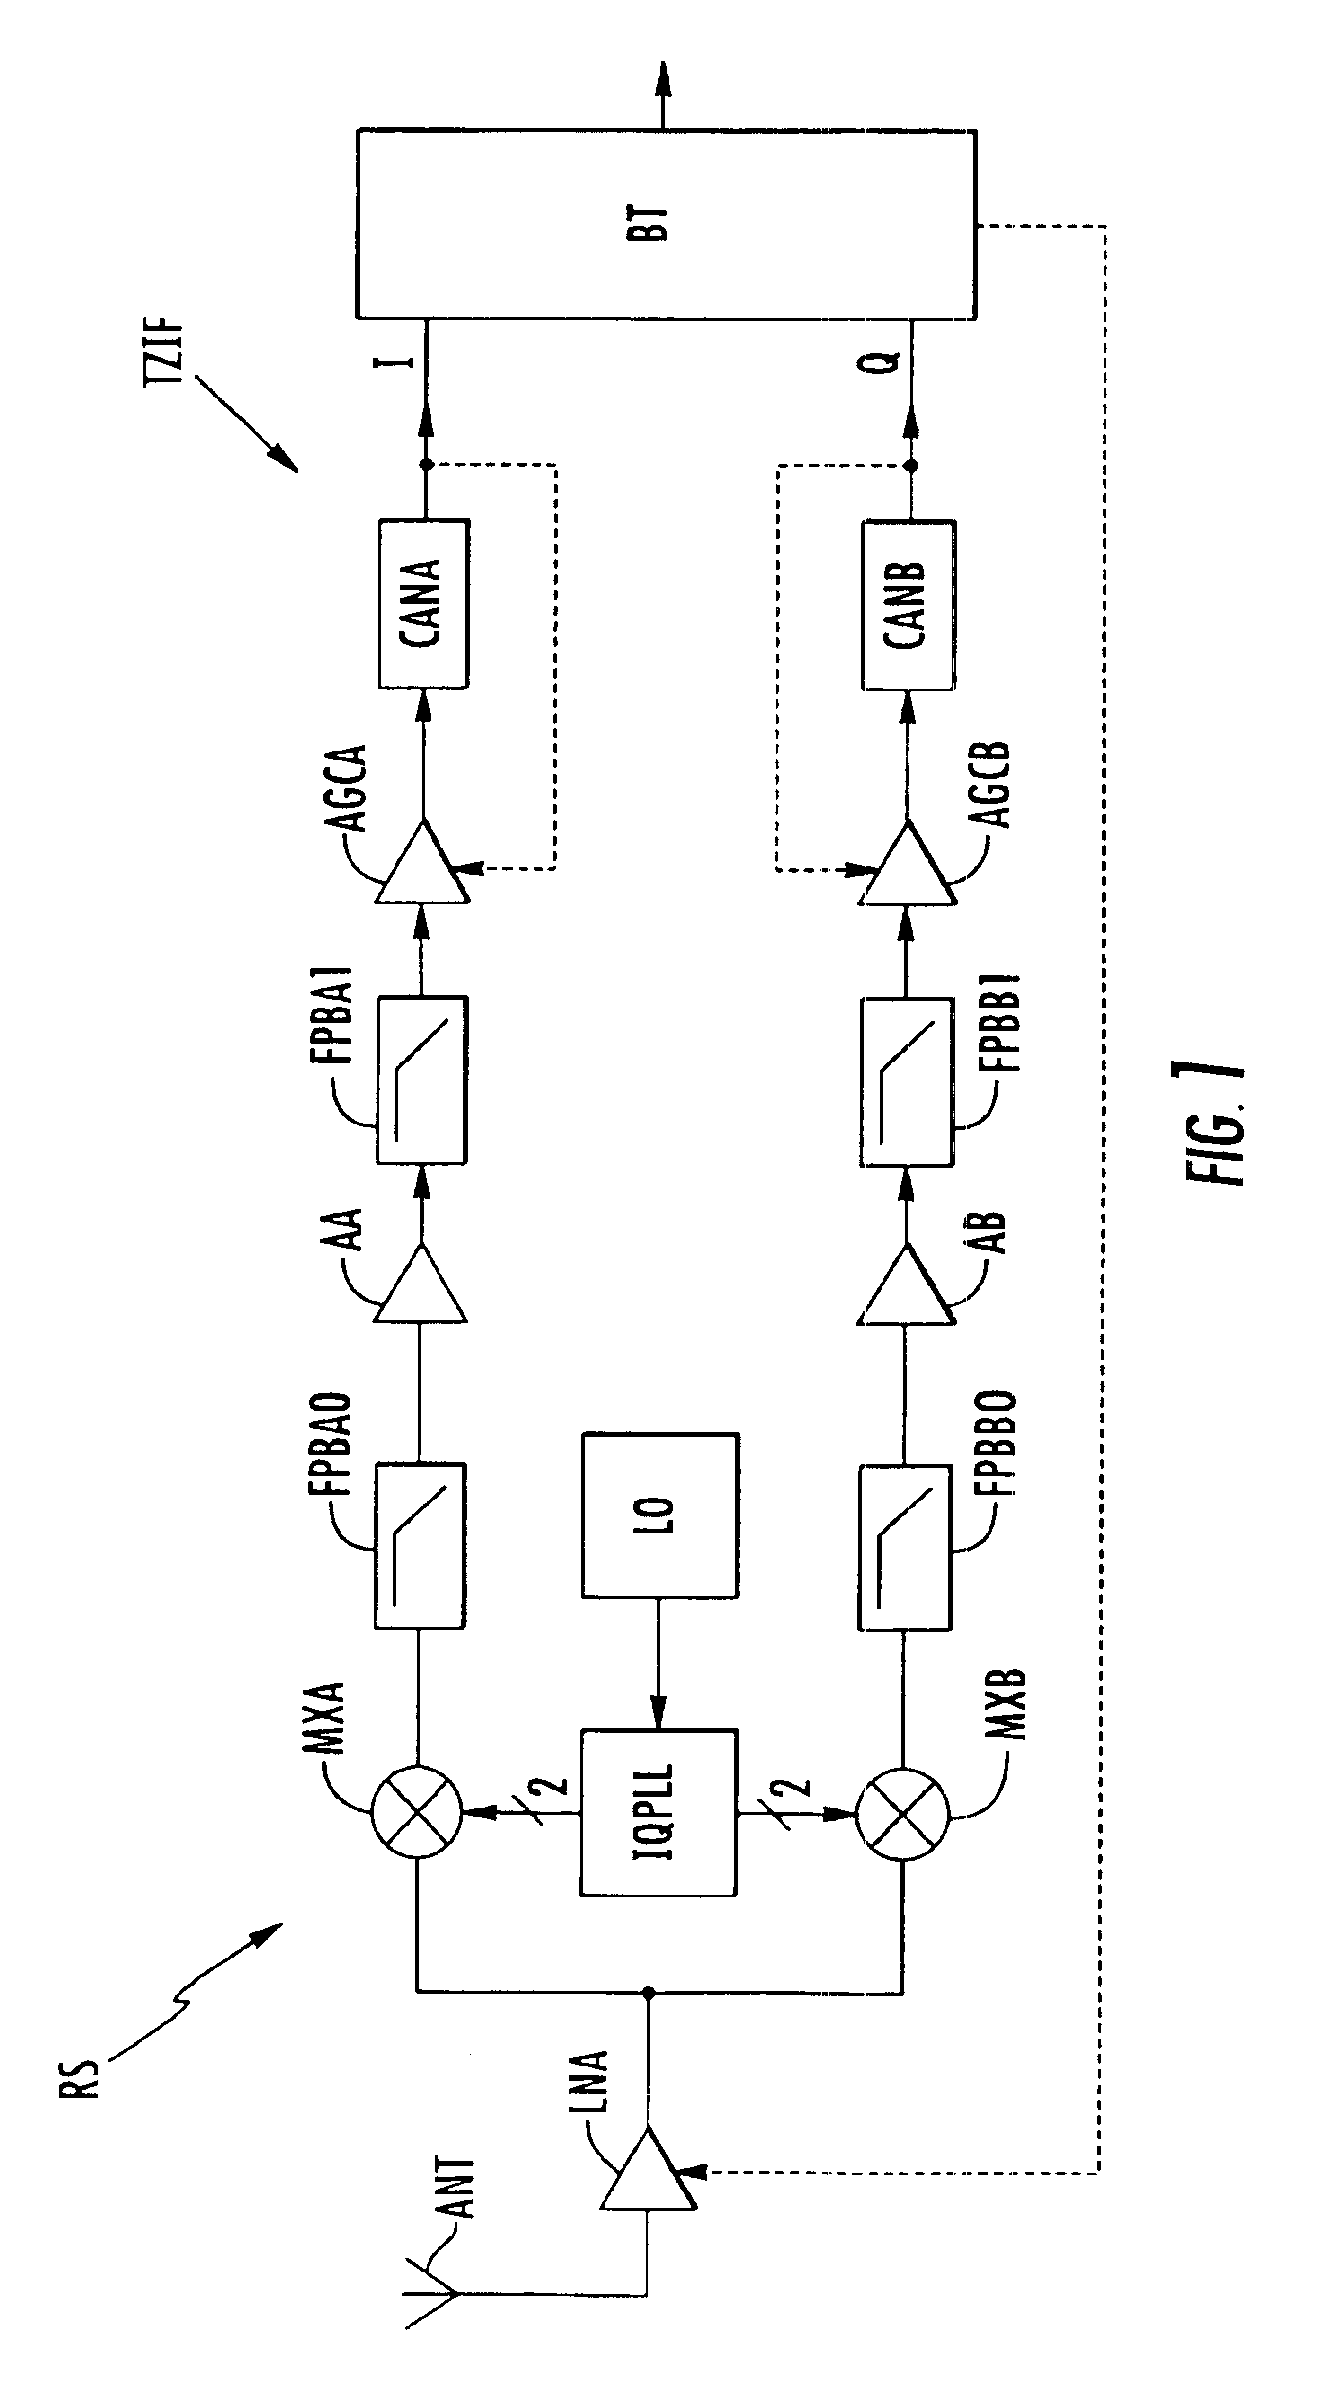 Process and device for controlling the phase shift between four signals mutually in phase quadrature